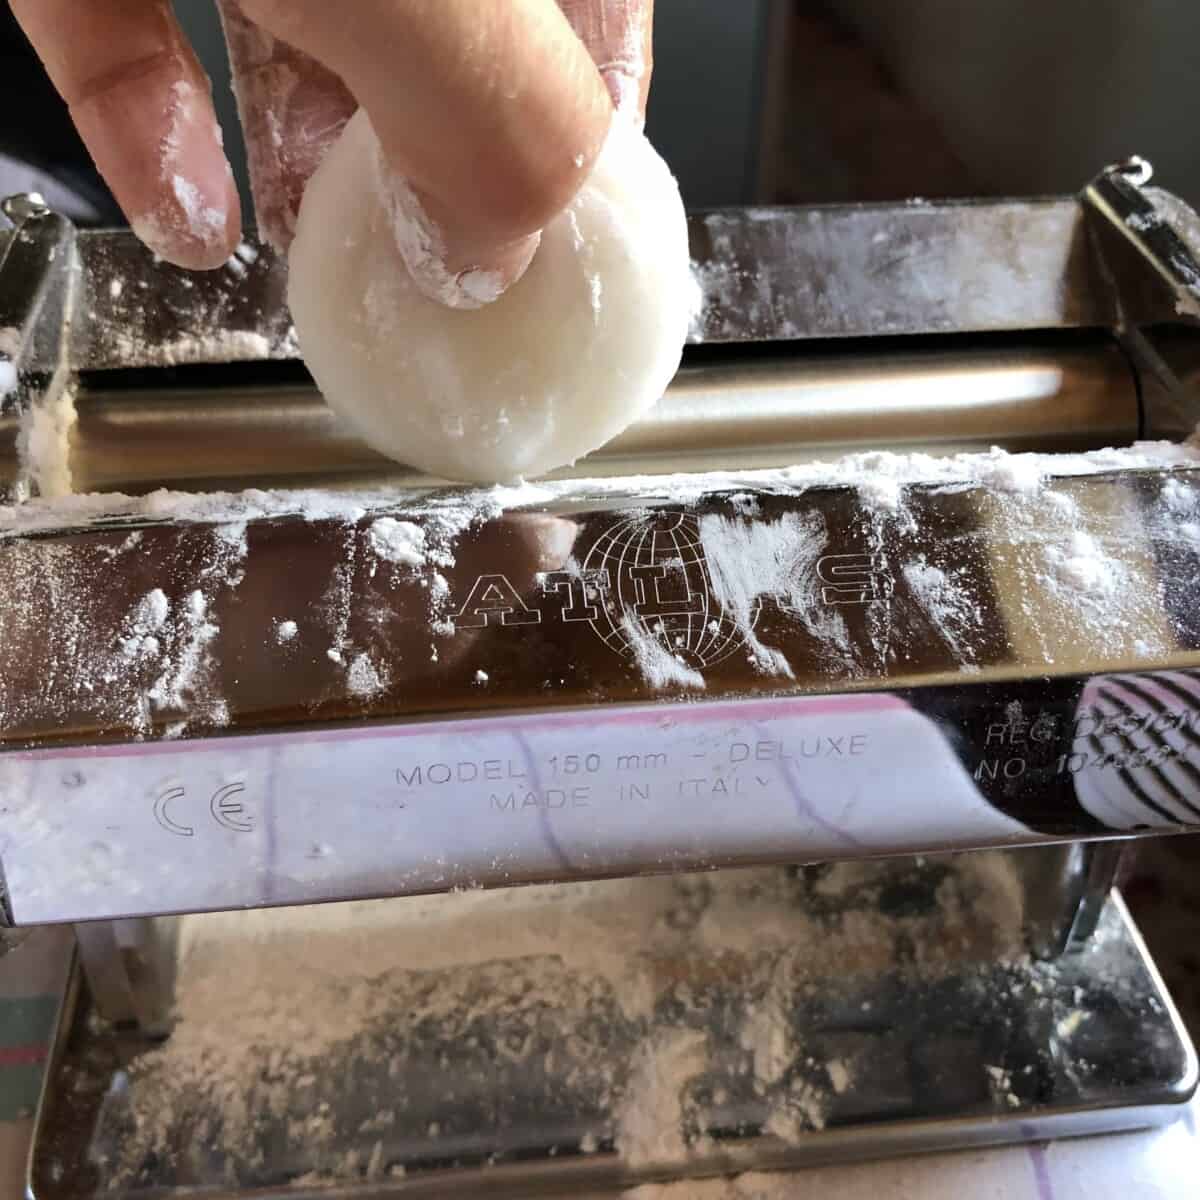 putting a piece of portioned dumpling dough into a pasta machine to roll it